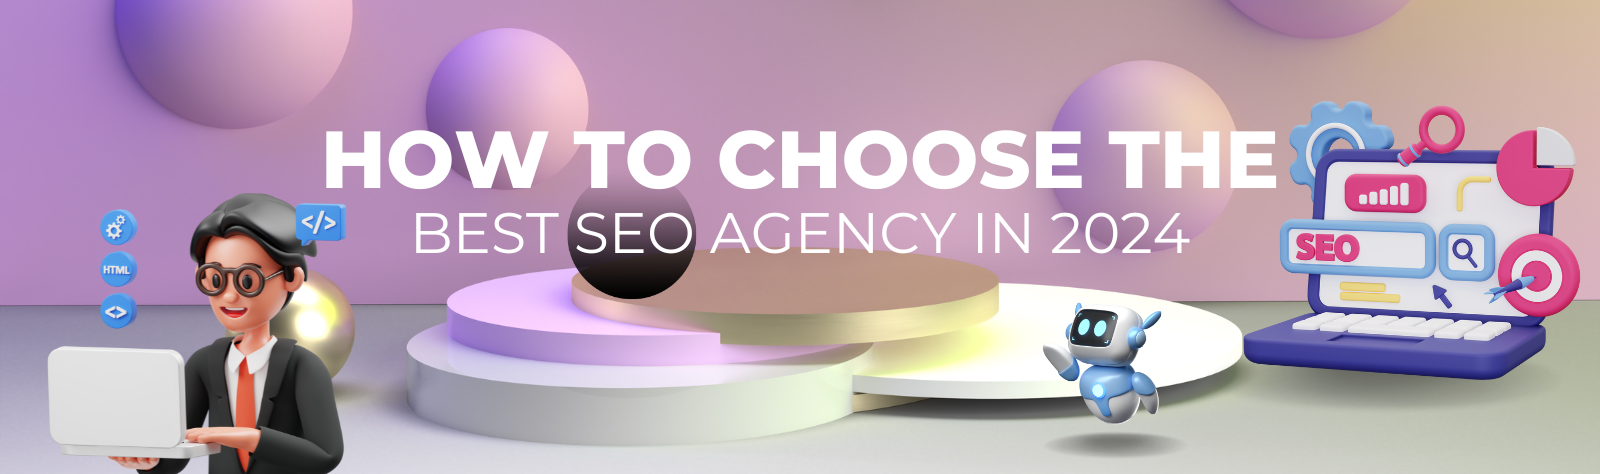 how-to-choose-the-best-seo-agency-in-2024